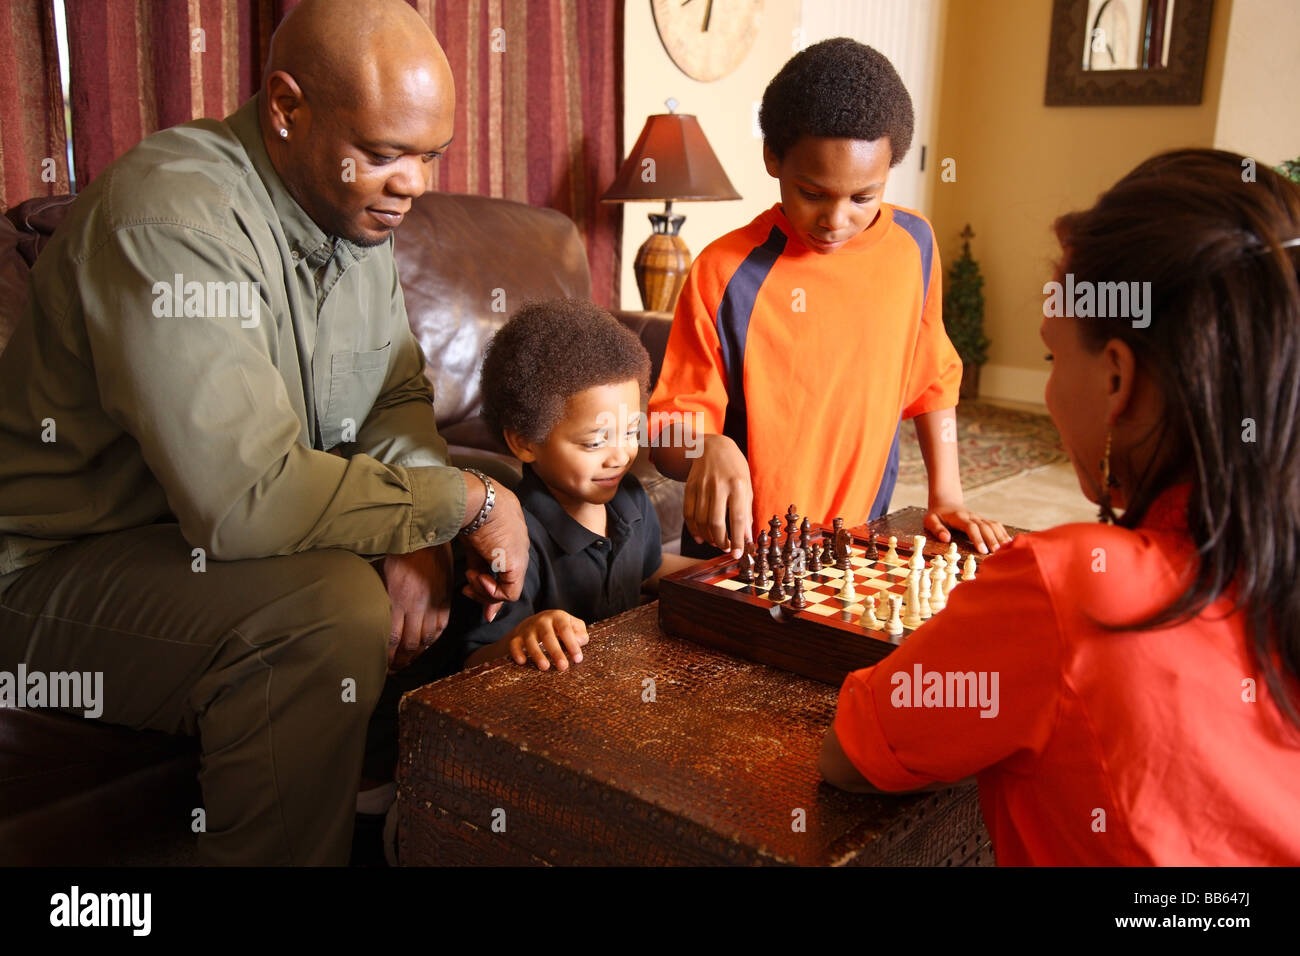 Family in living room playing chess together Stock Photo